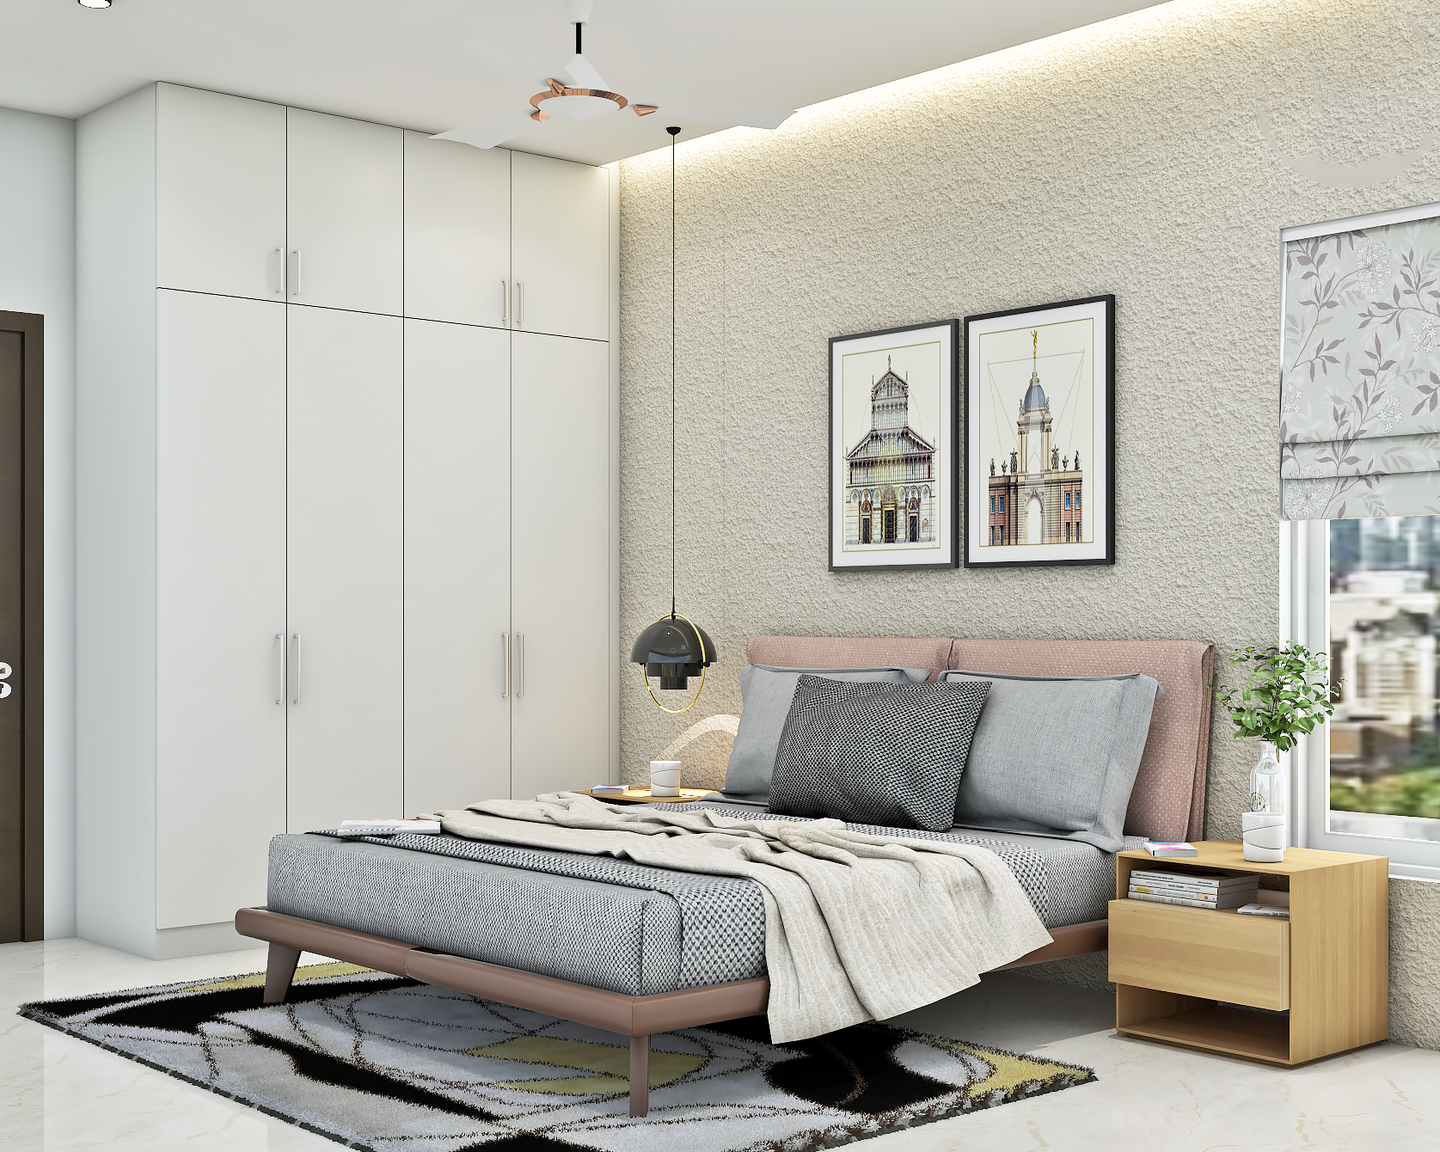 Compact Bedroom with Accent Wall - Livspace